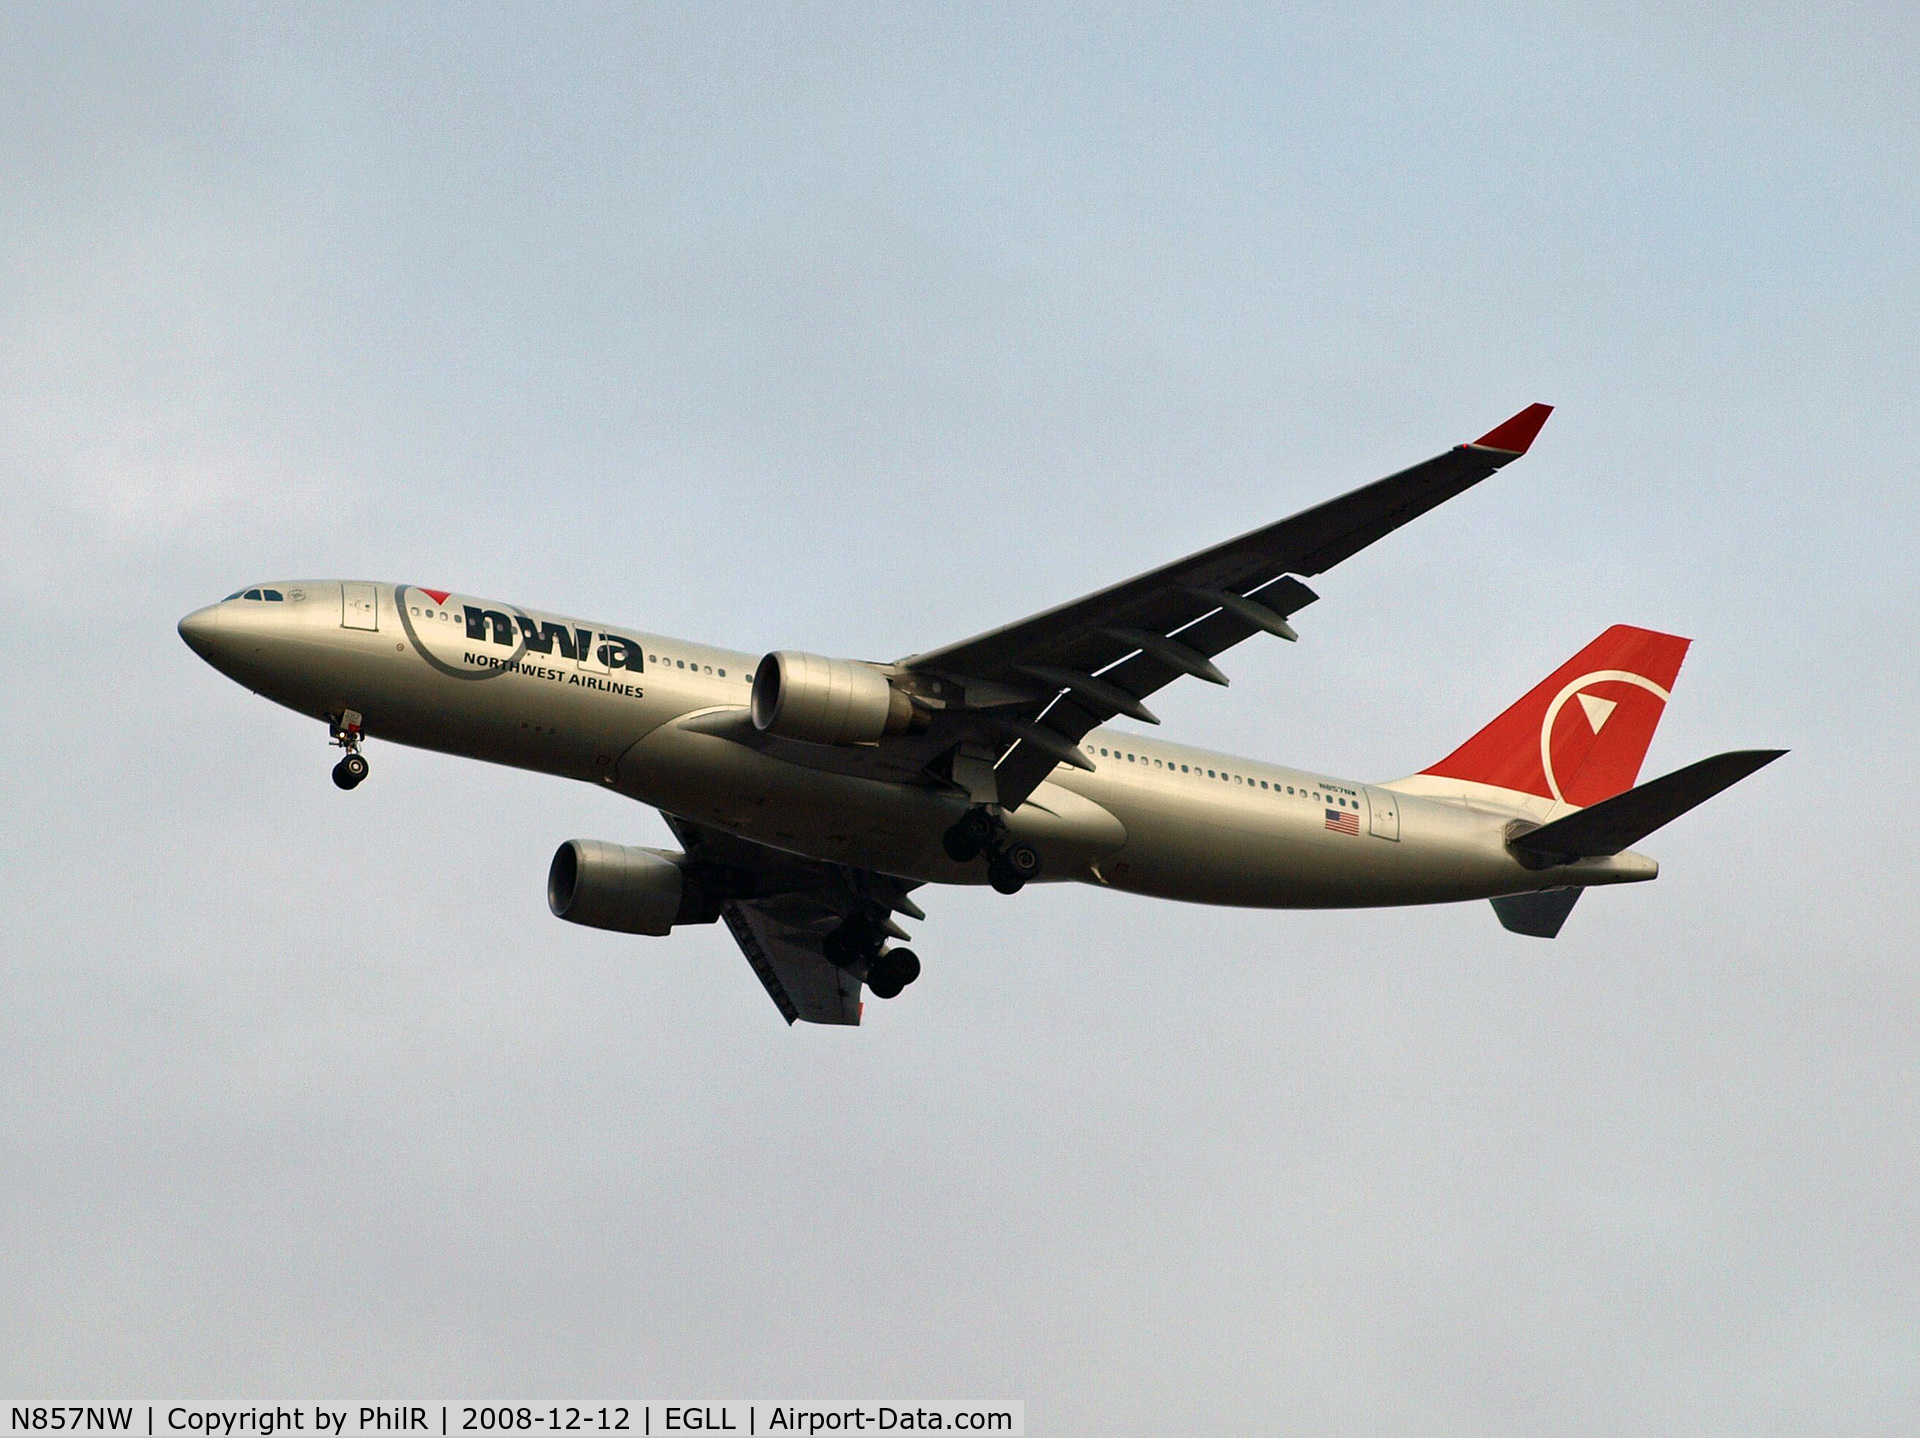 N857NW, 2004 Airbus A330-223 C/N 0633, Northwest Airlines A330-200 N857NW on finals for LHRs 27L